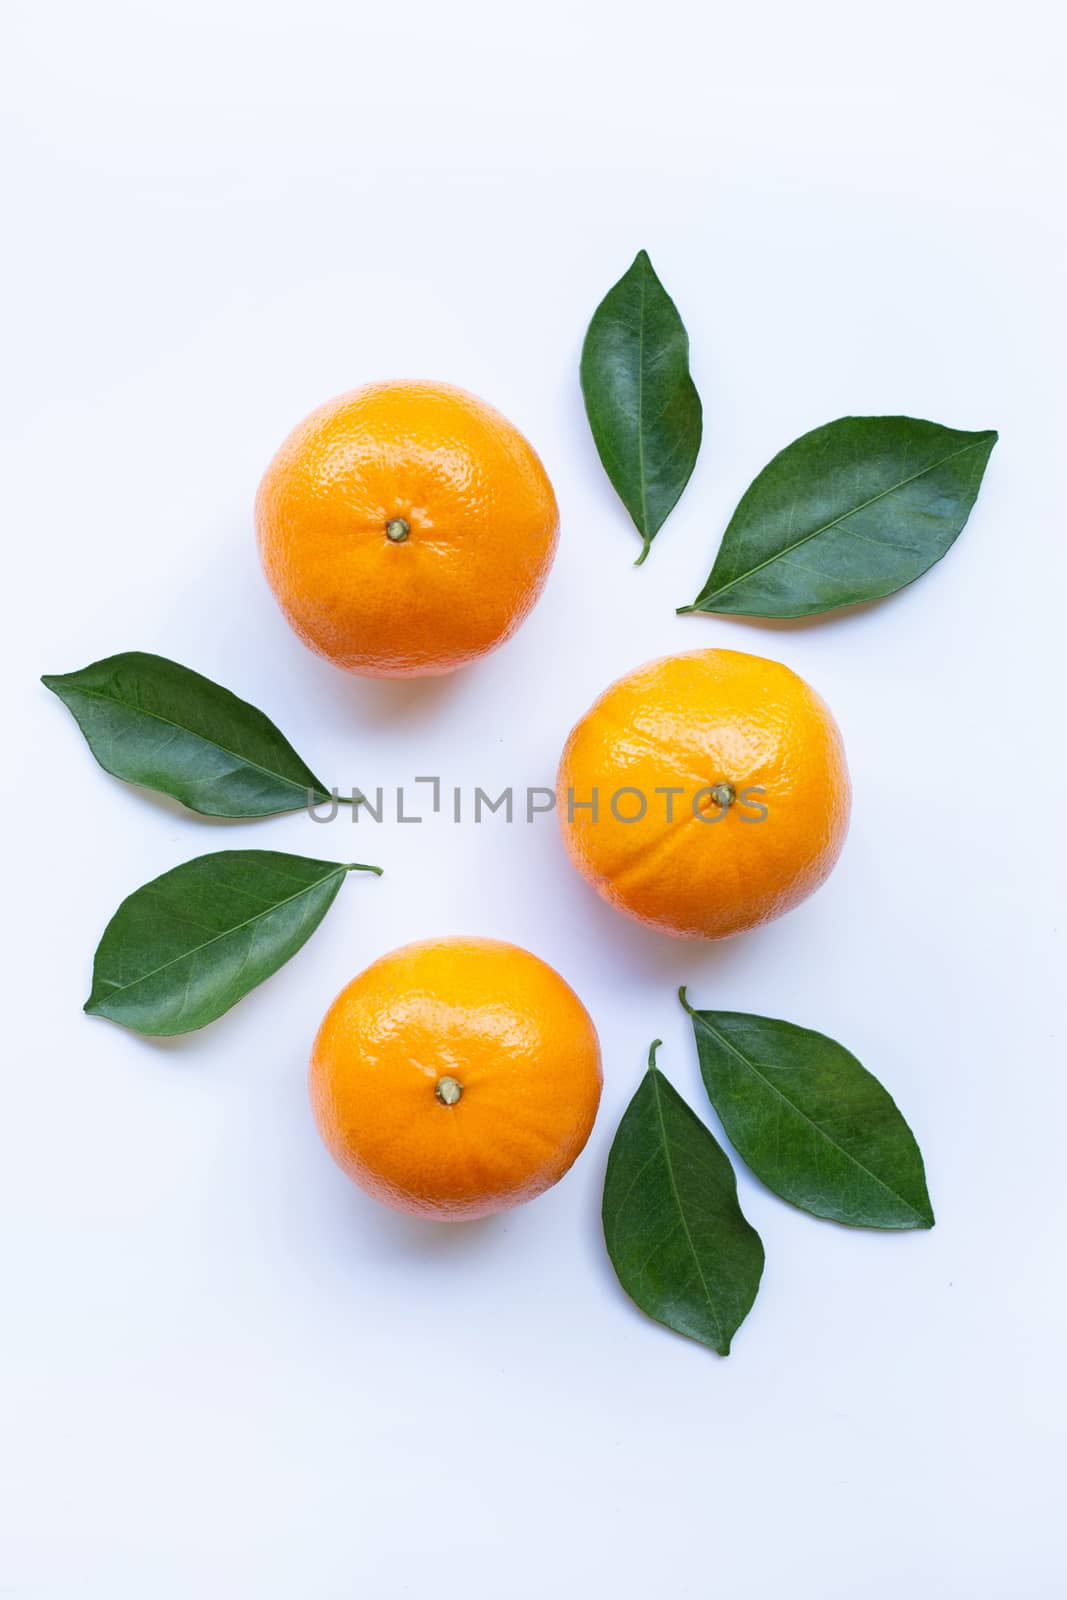 Fresh orange citrus fruit with leaves isolated on white background.  Top view